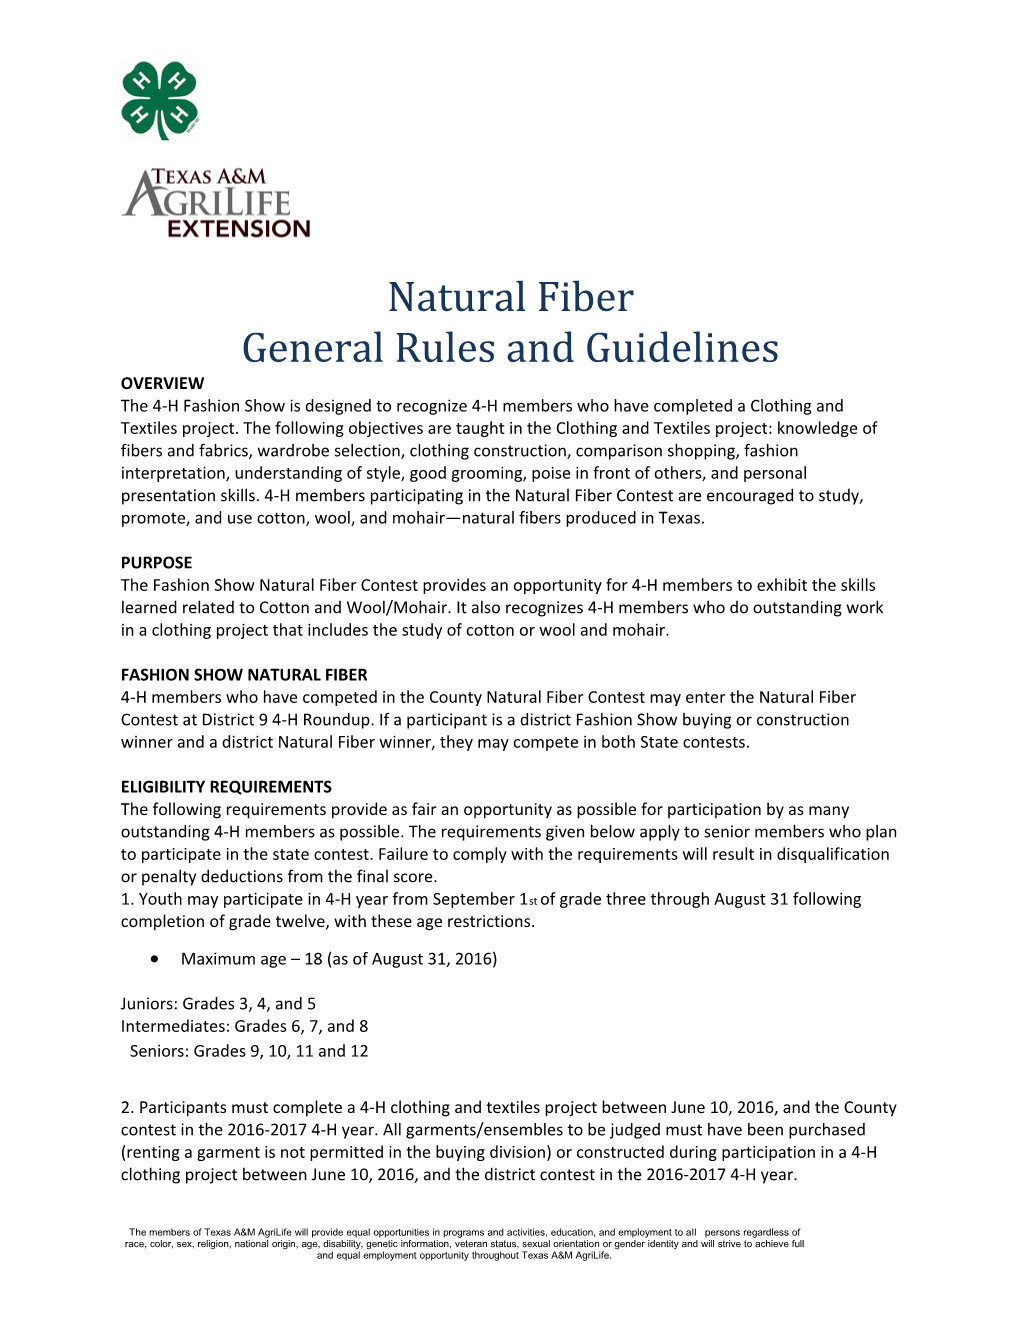 General Rules and Guidelines